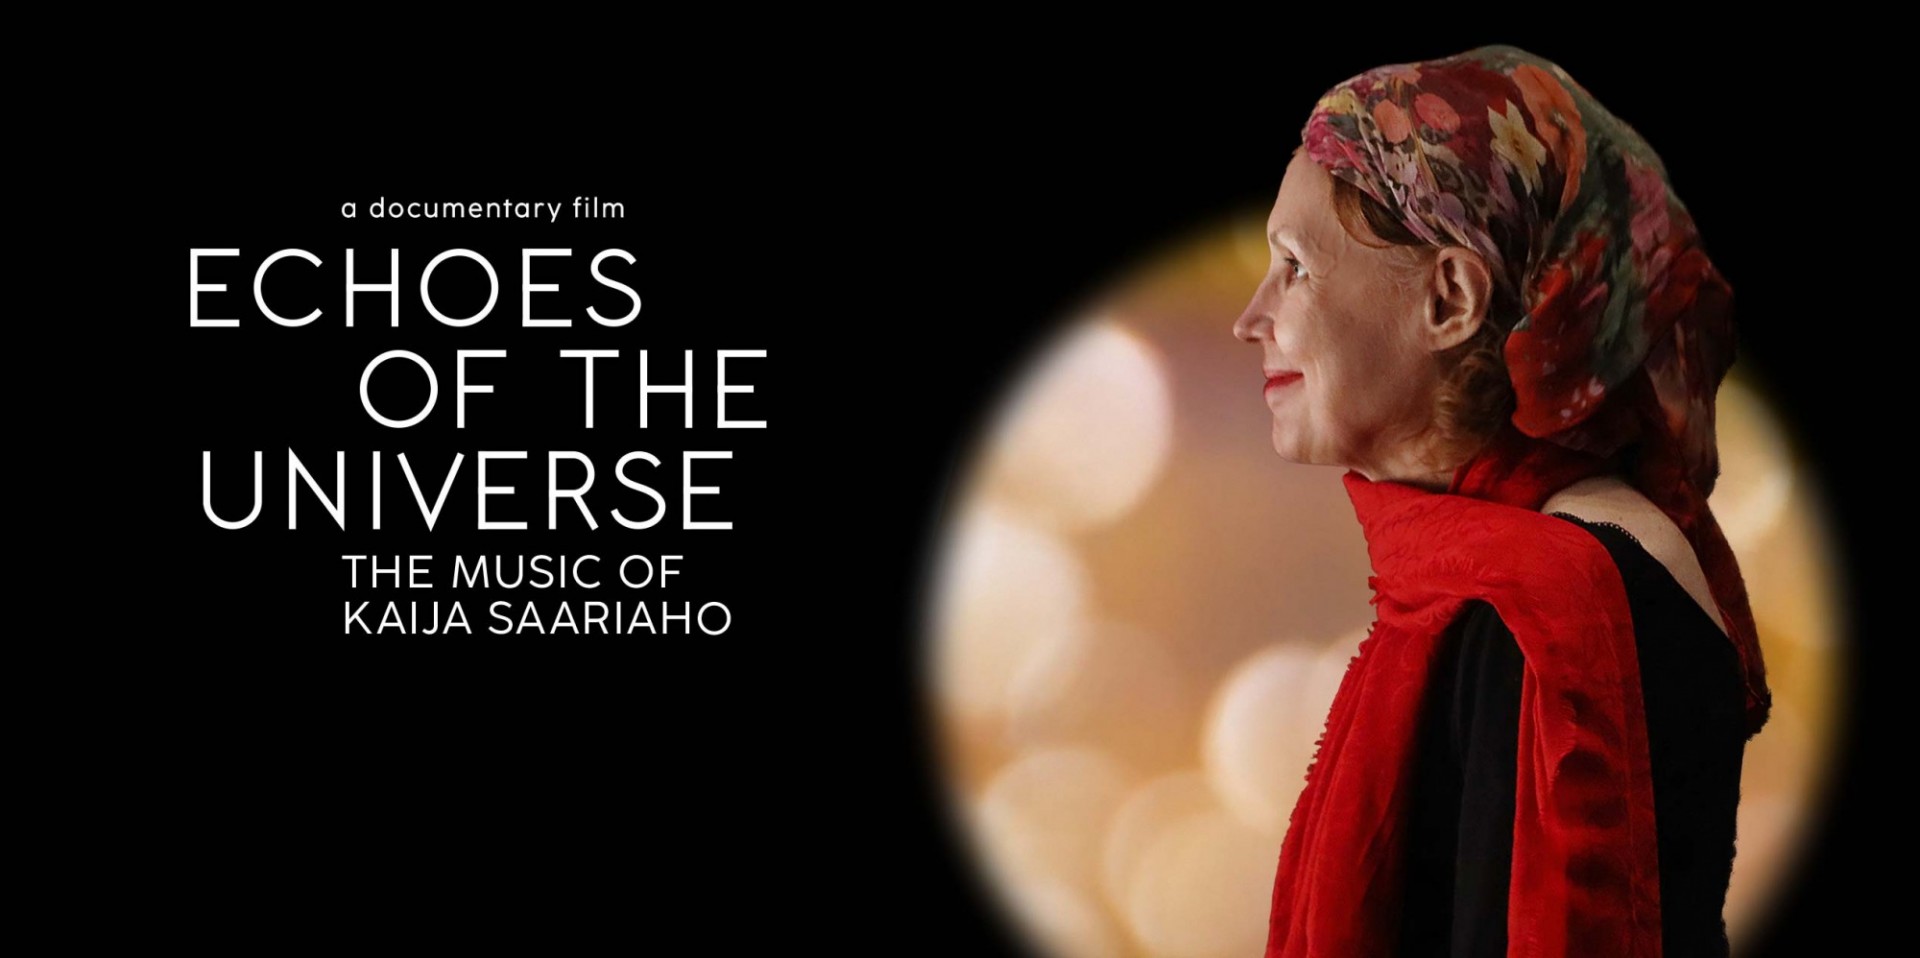 “Echoes of the Universe - The Music of Kaija Saariaho”